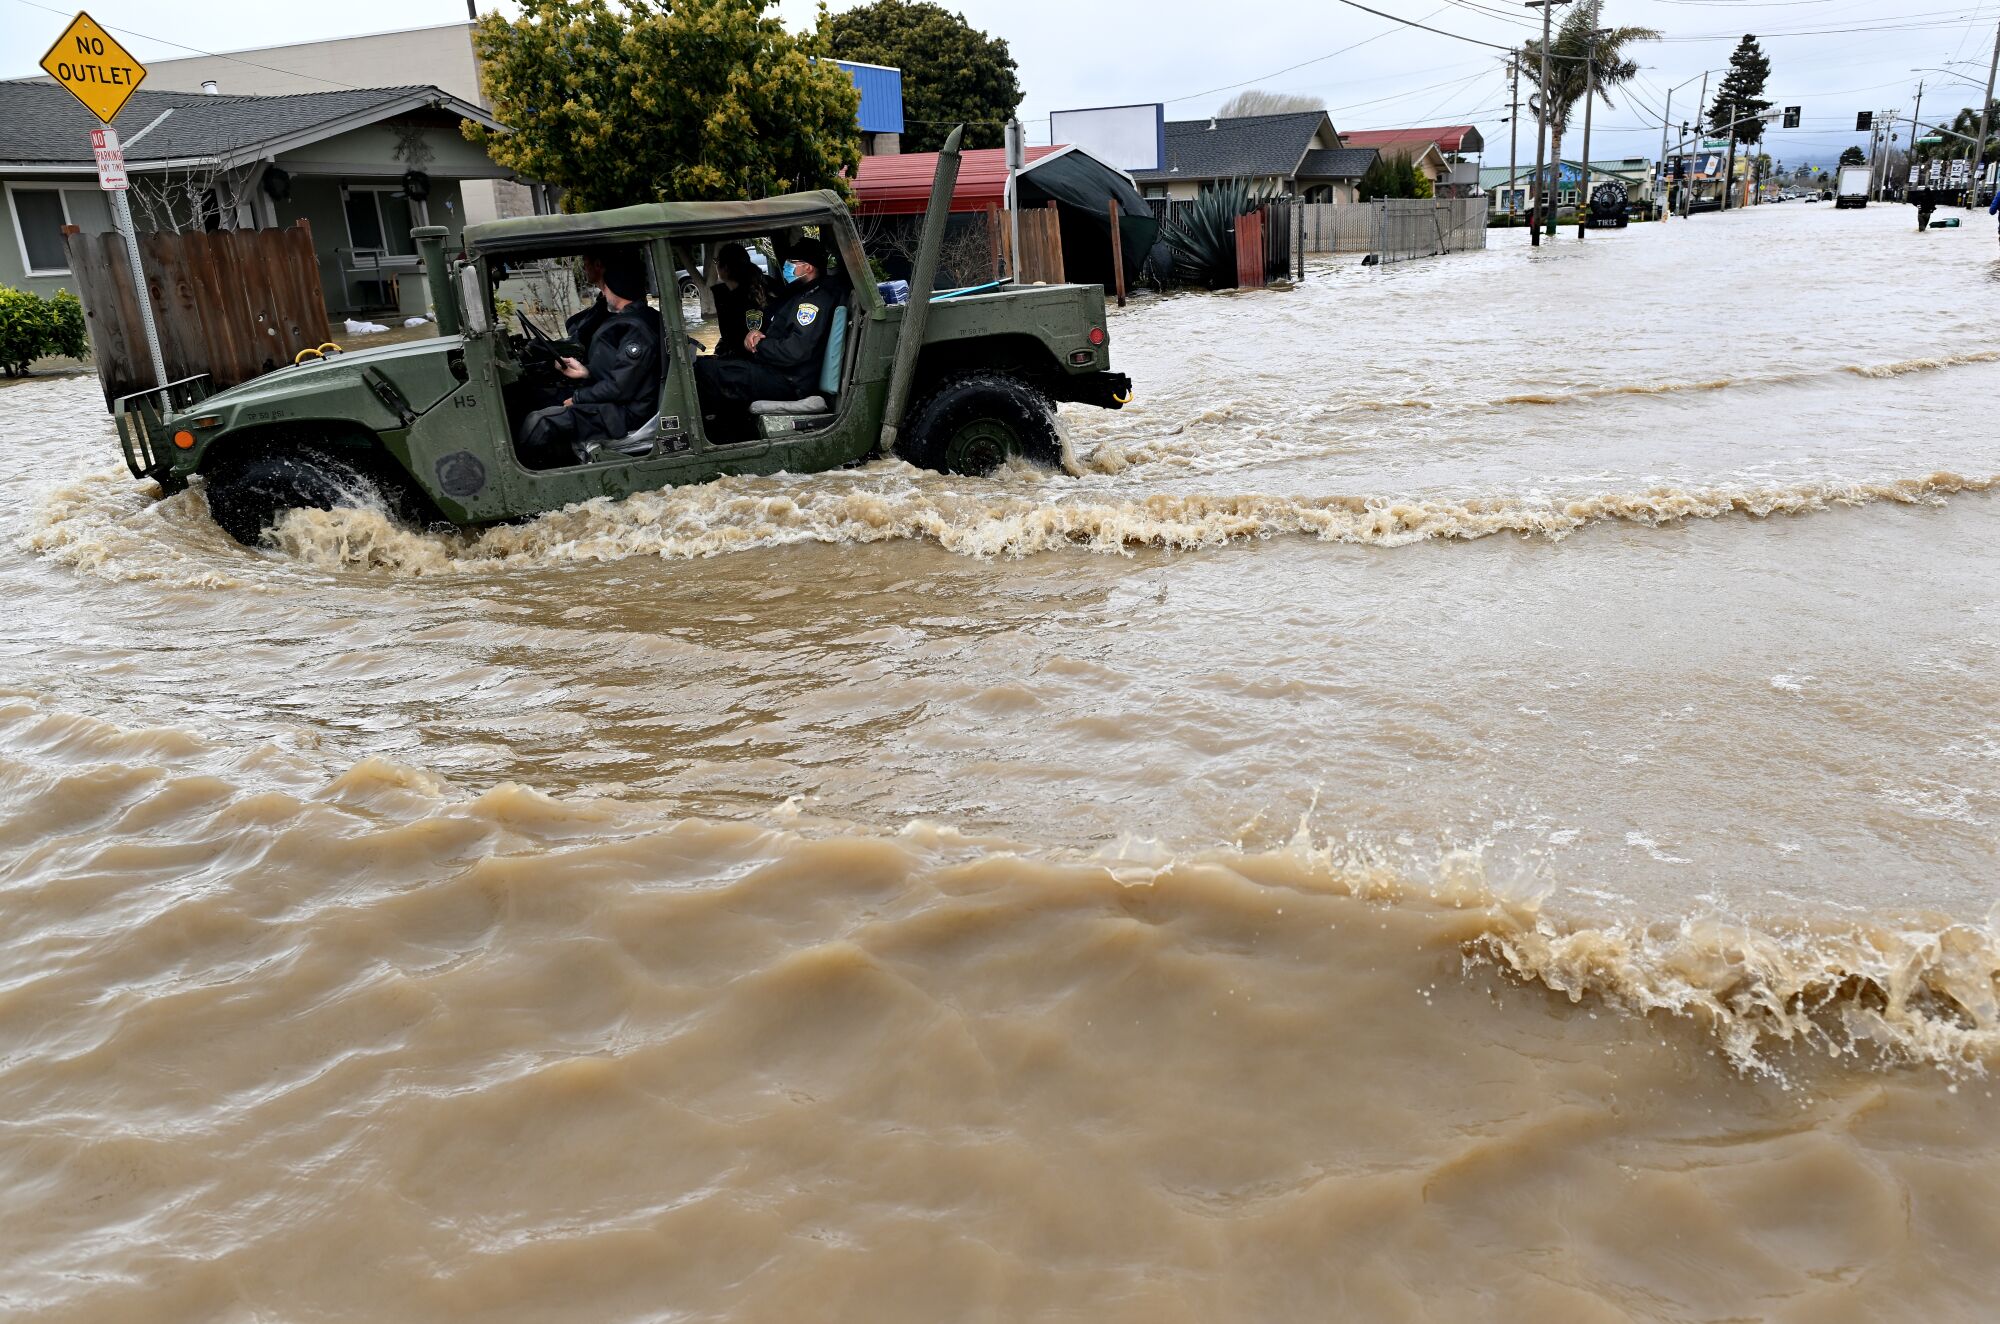 Local police drive a military vehicle along the flooded road from Salinas to Pajaro 